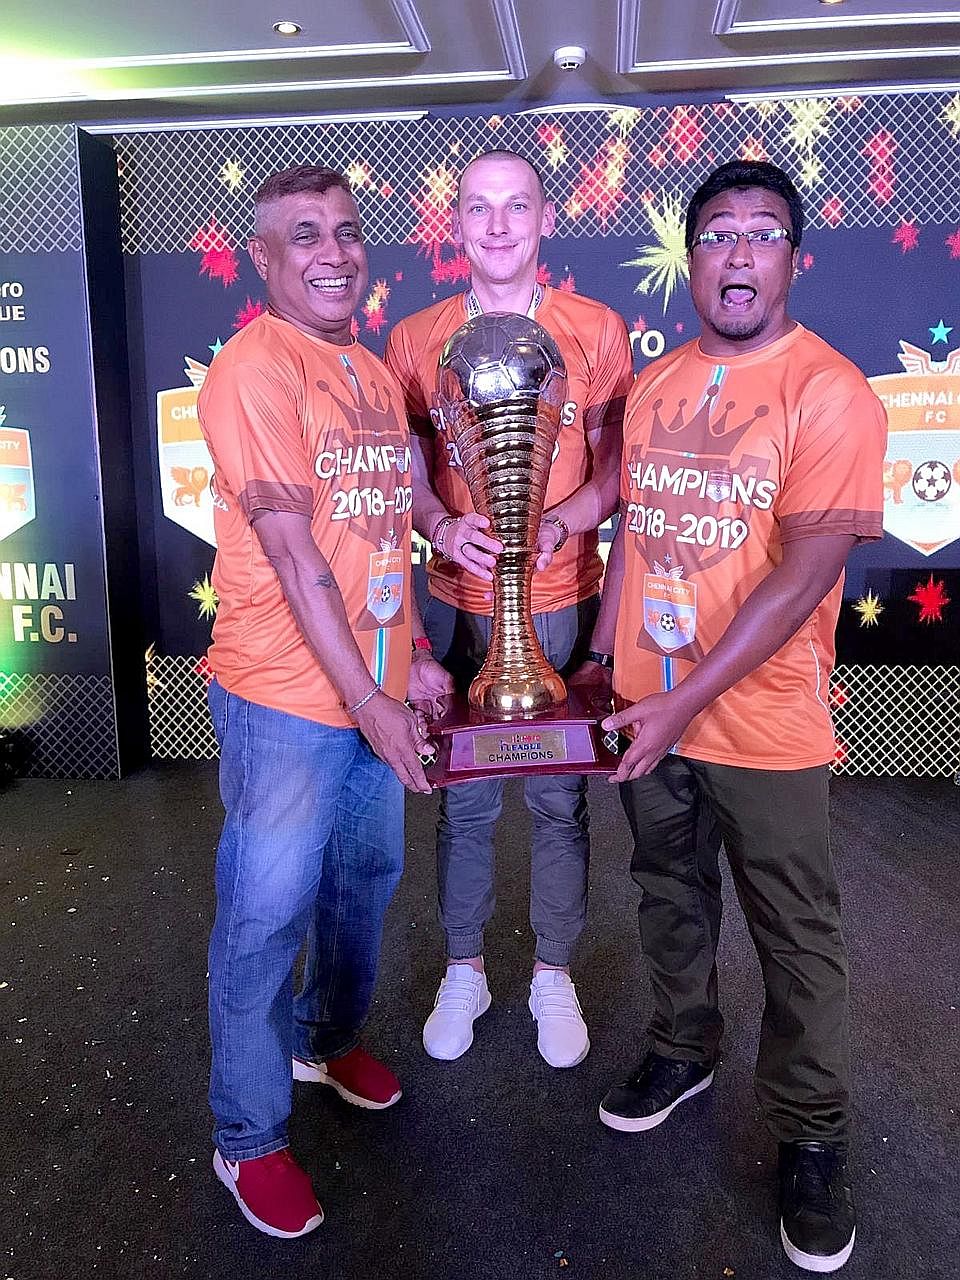 From right: I-League champions Chennai City coach Akbar Nawas, import Jozef Kaplan and assistant coach K. Balagumaran posing with the I-League trophy. Akbar was named Coach of the Year at the I-League awards and trophy presentation ceremony on Wednes